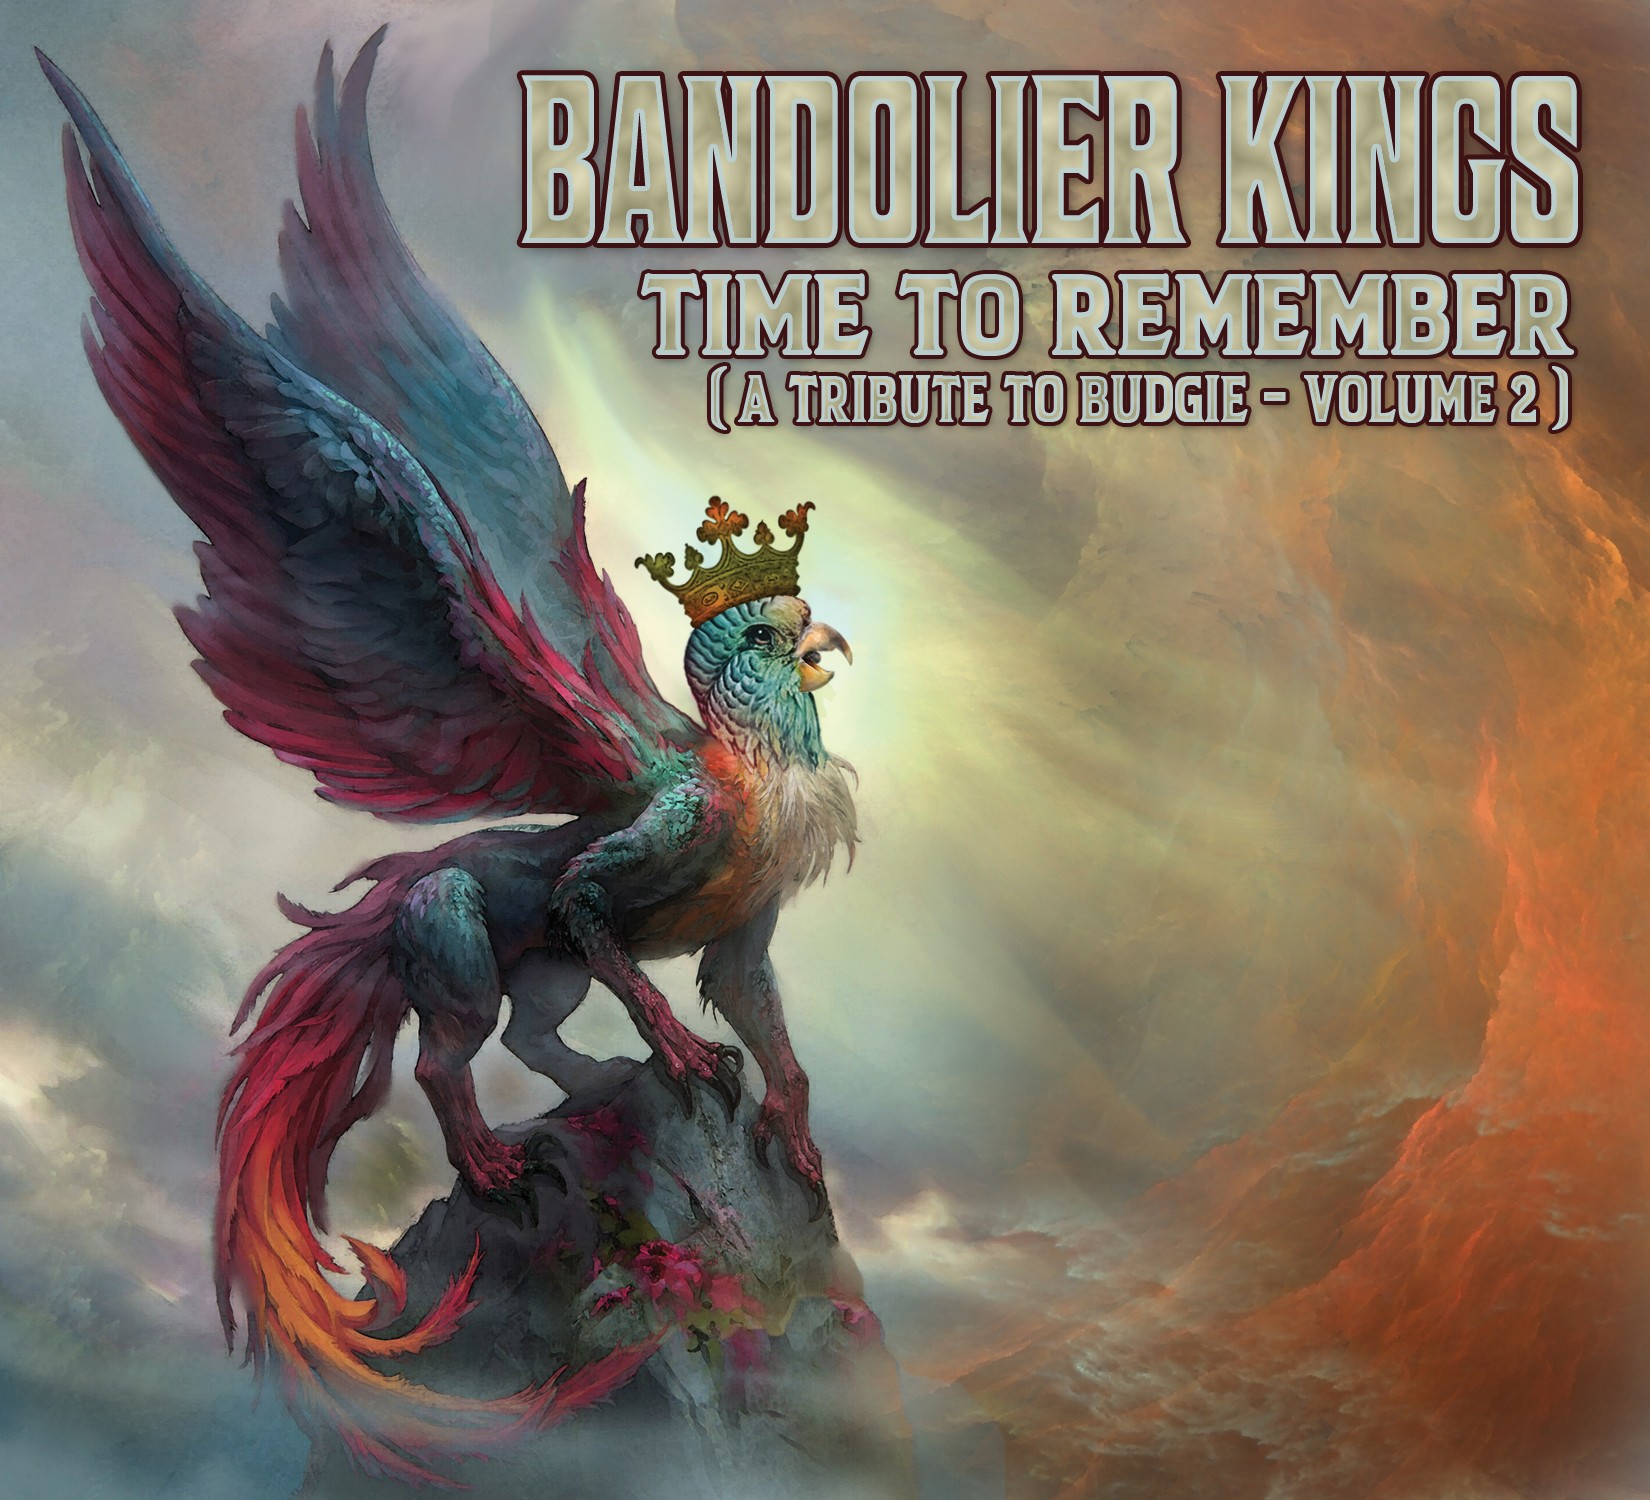 Bandolier Kings - Time To Remember (A Tribute To Budgie - Volume 2)